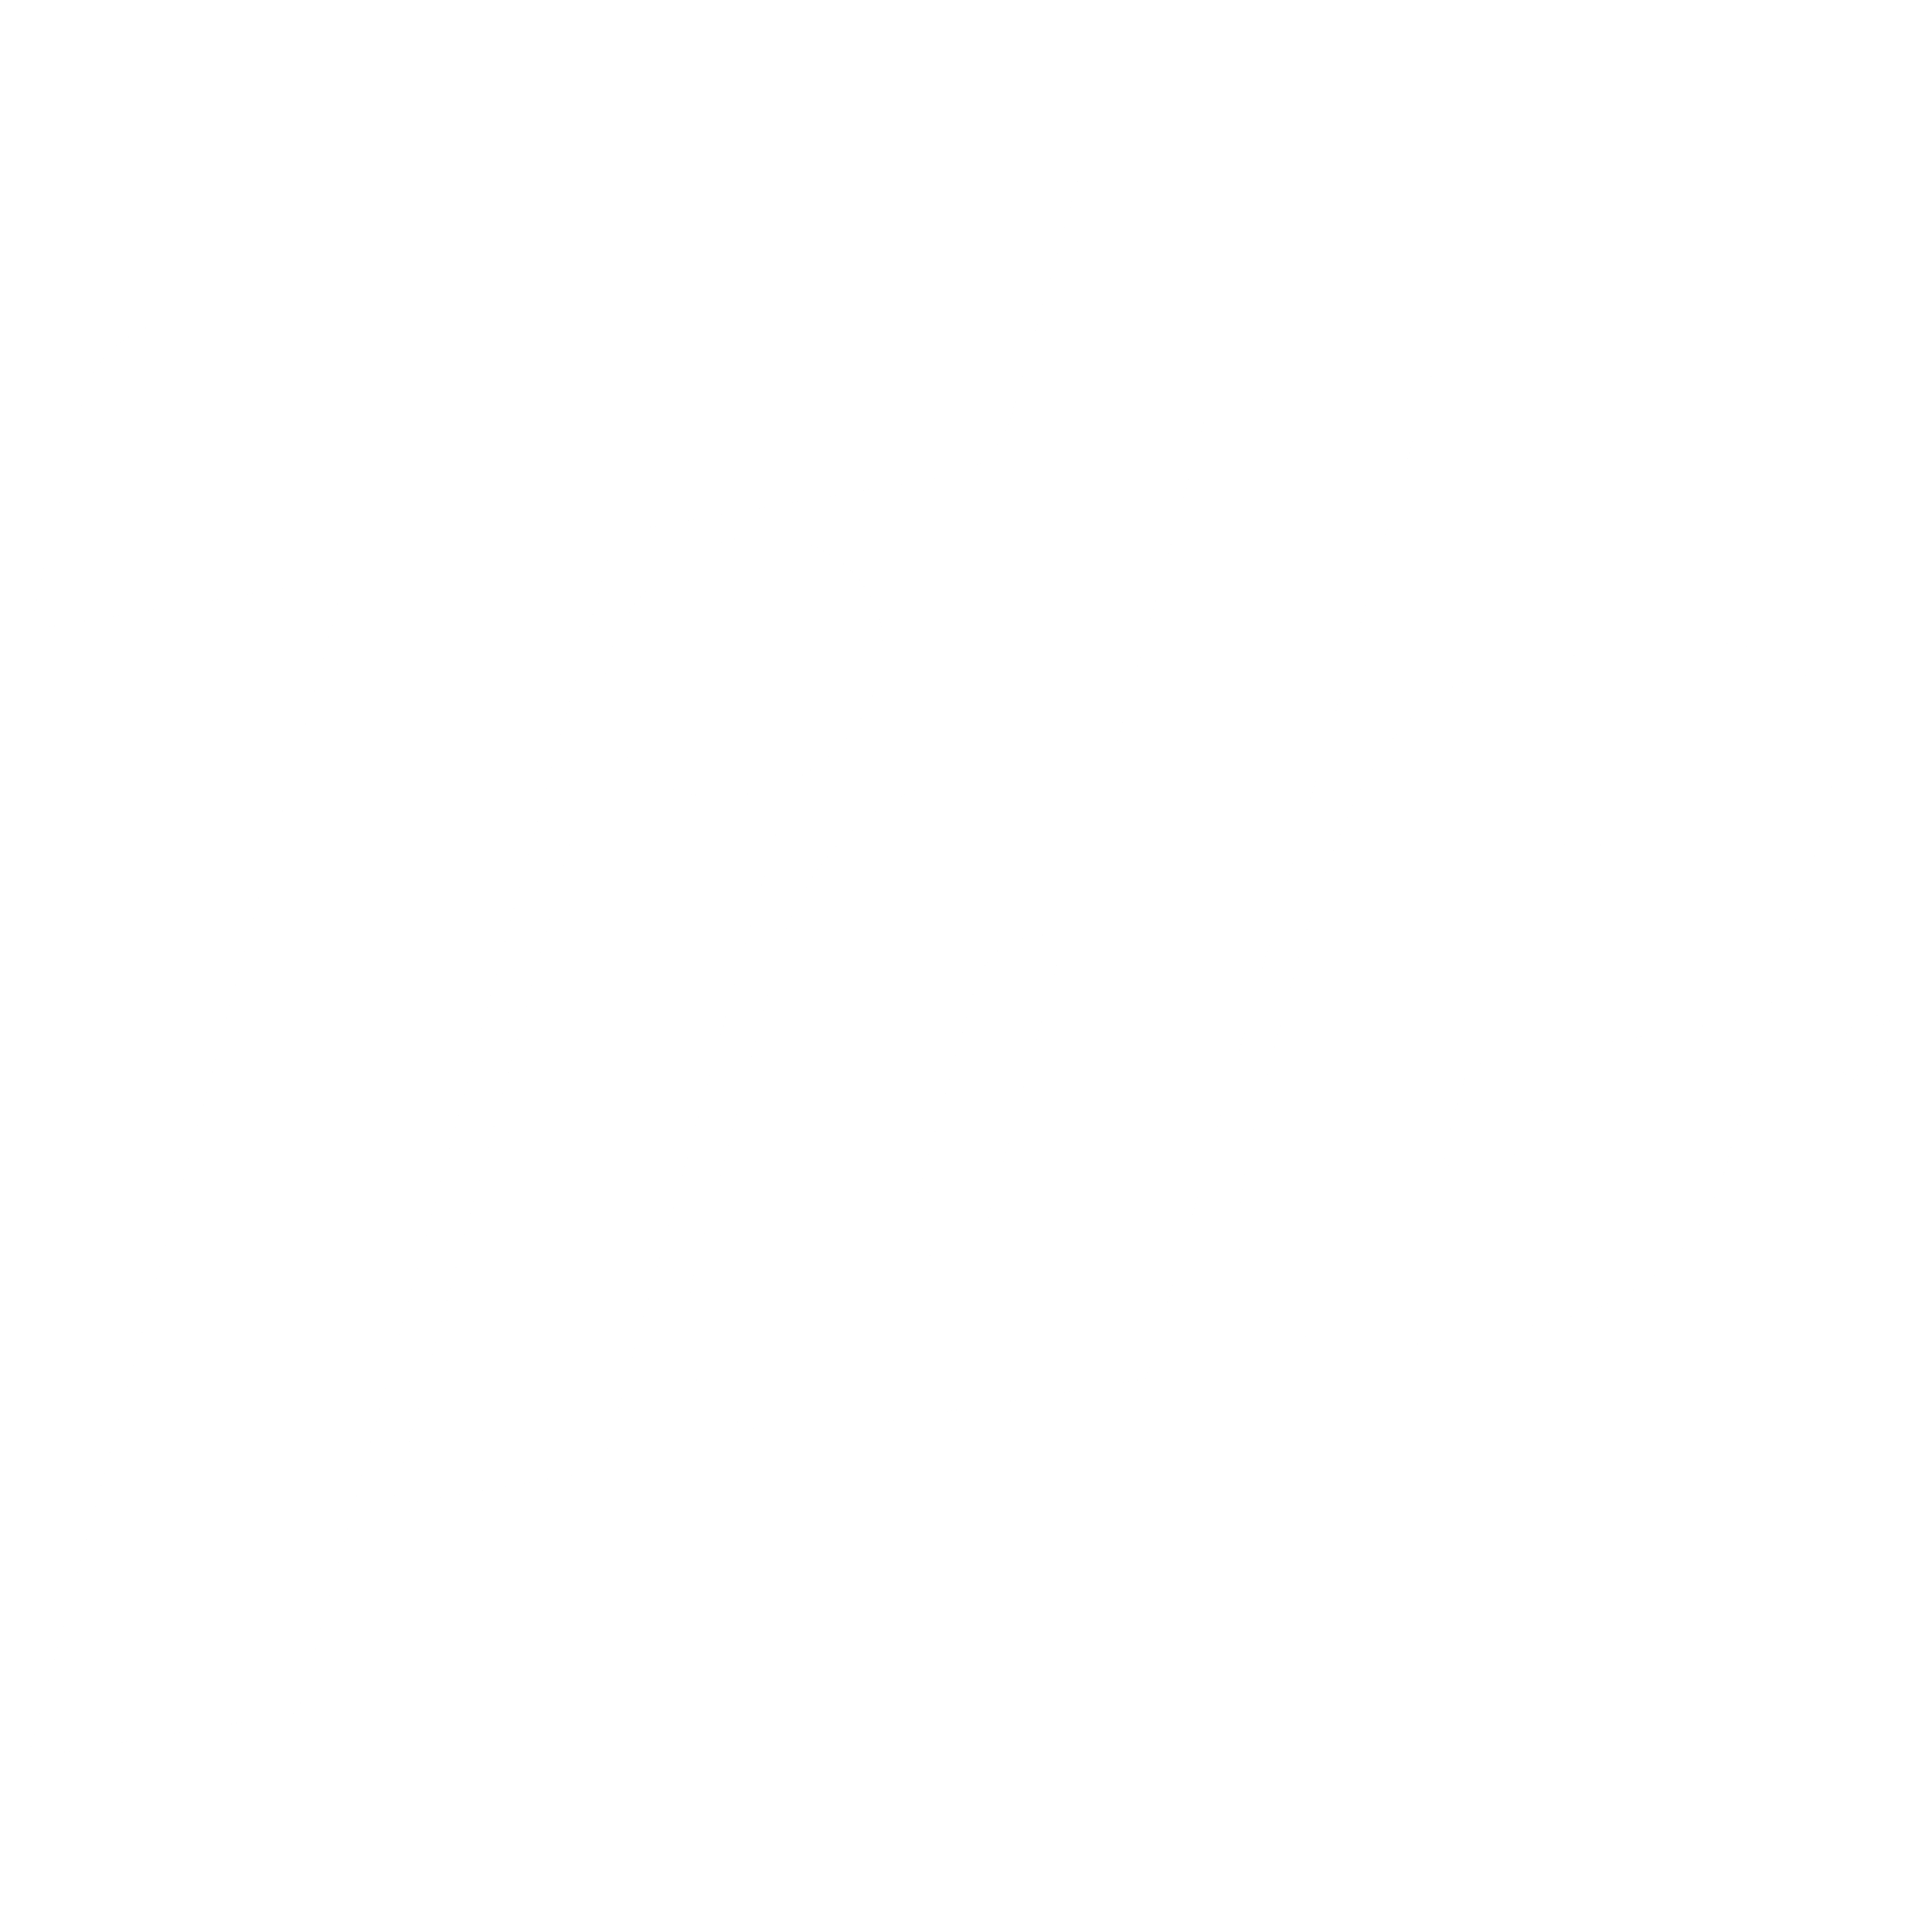 tide-1-logo-black-and-white.png